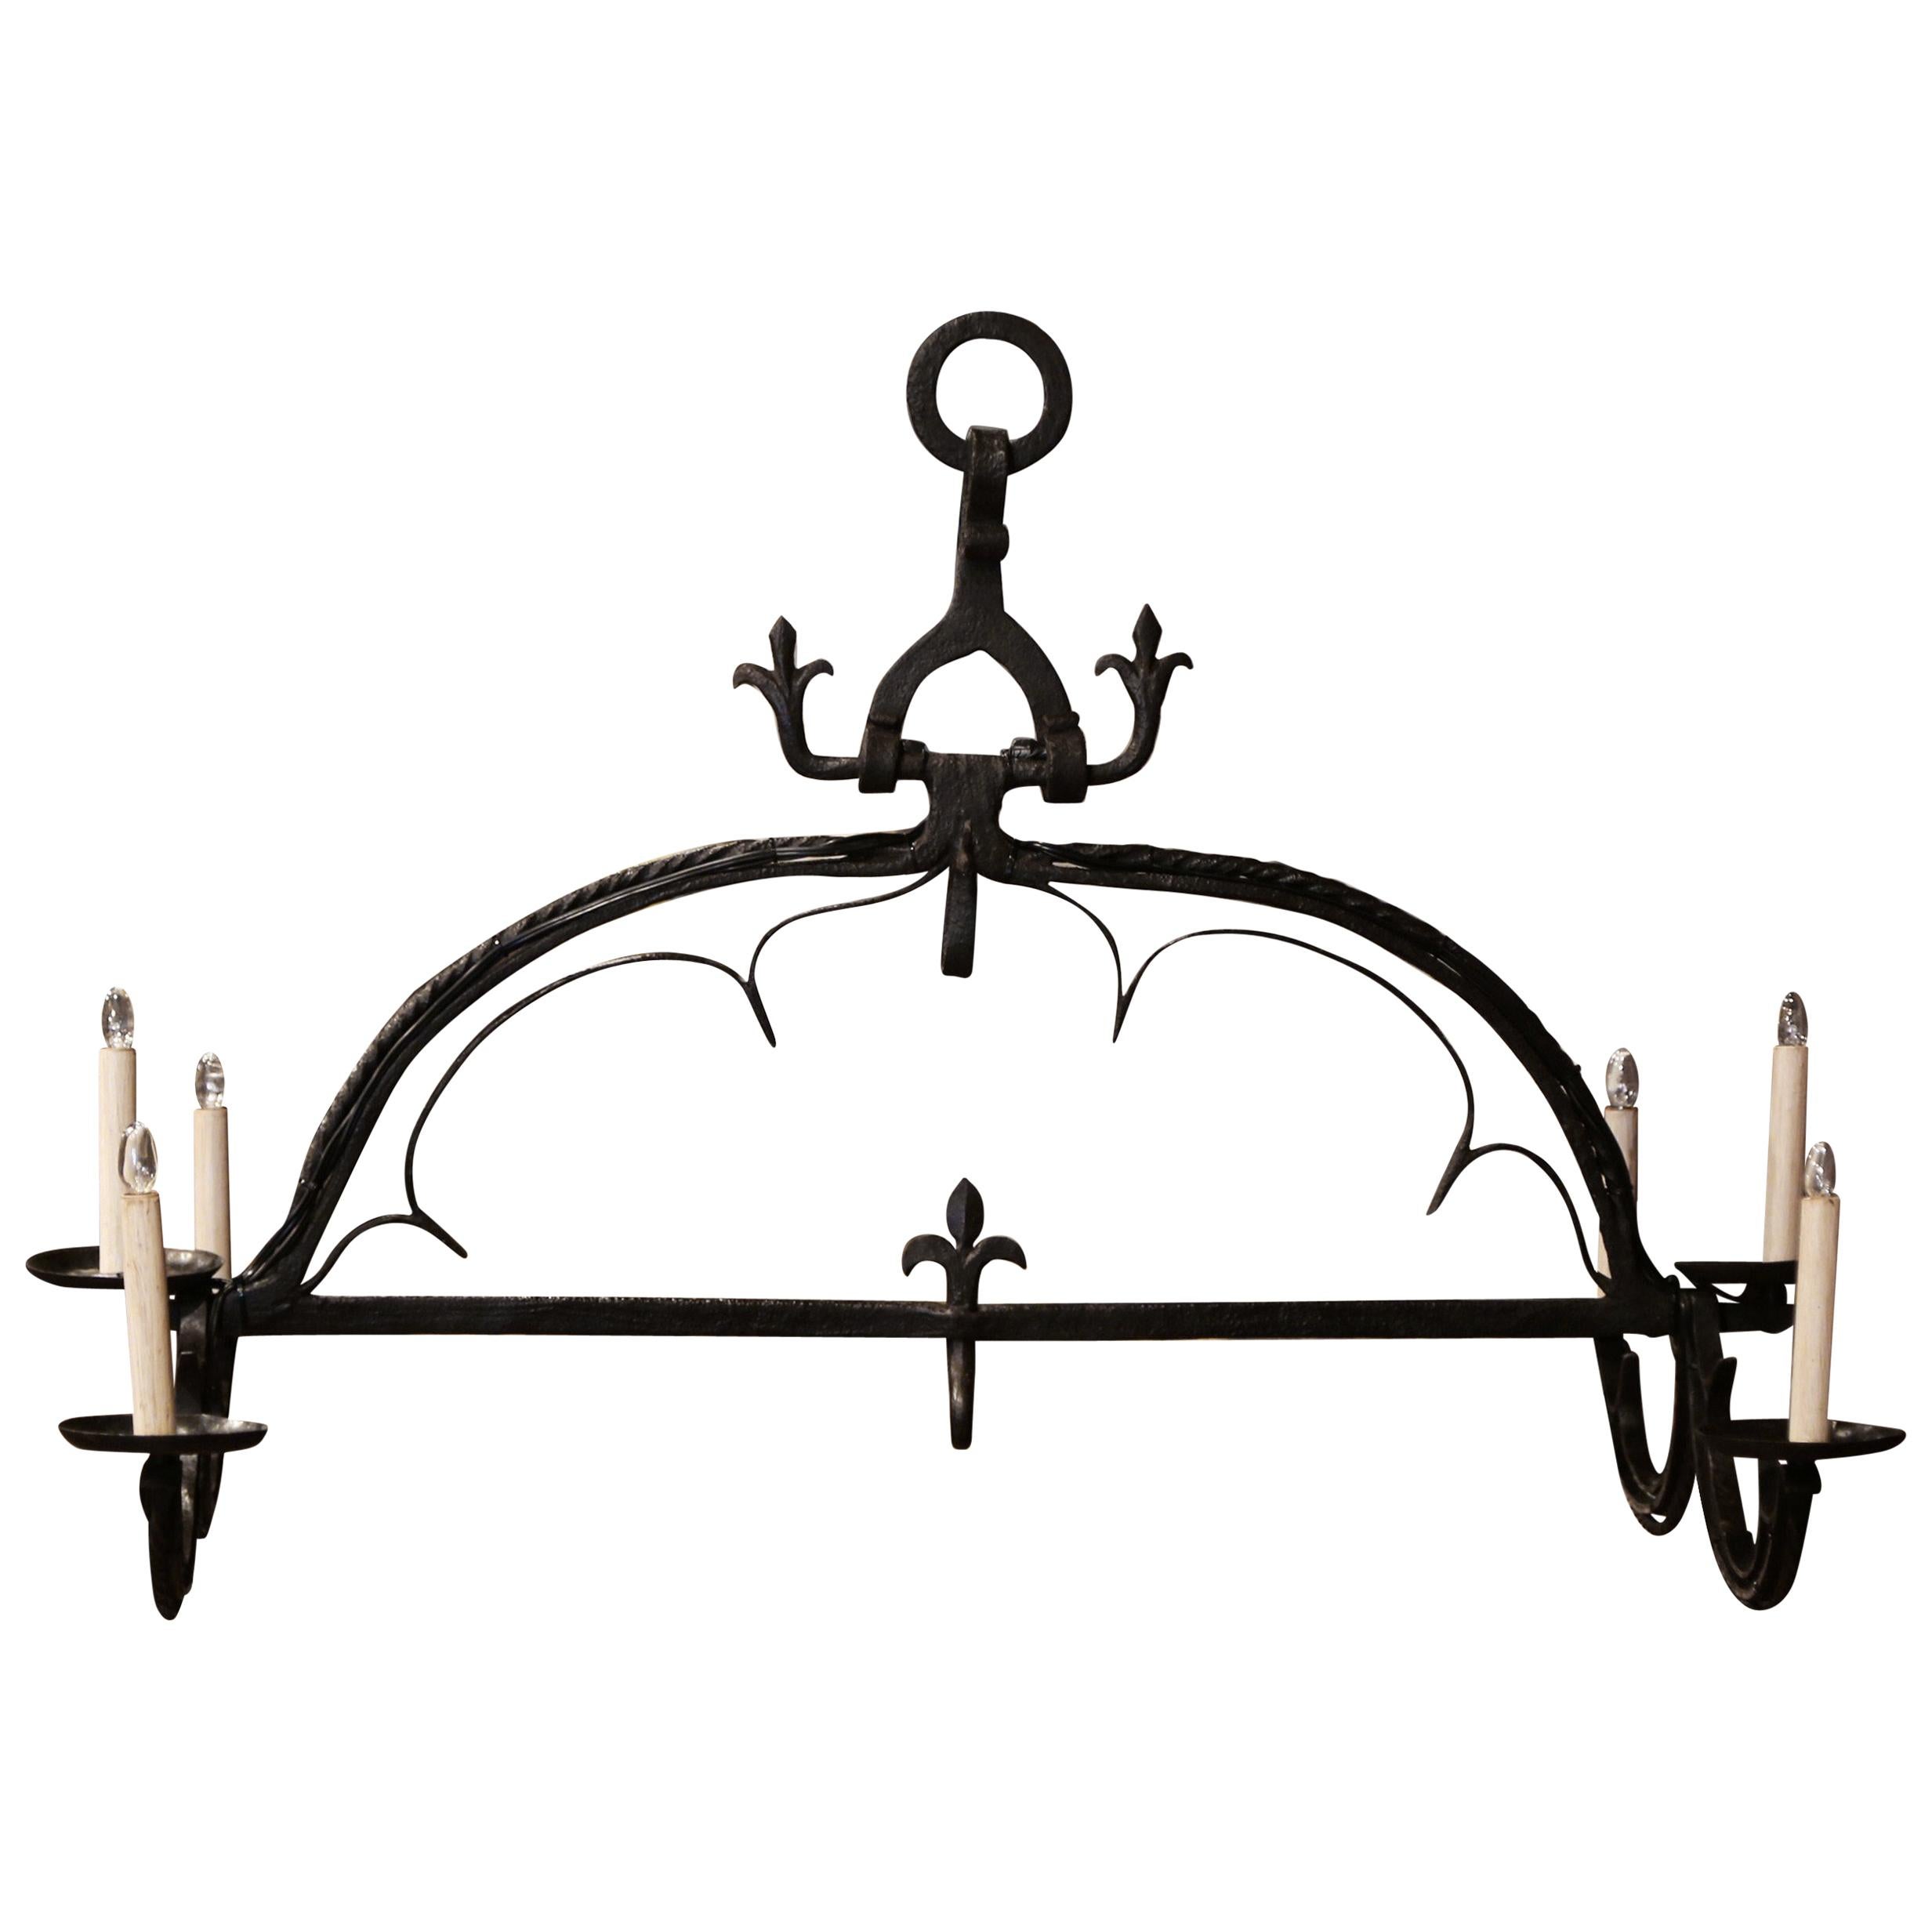 19th Century French Wrought Iron Island Six-Light Chandelier with Fleur-de-Lys